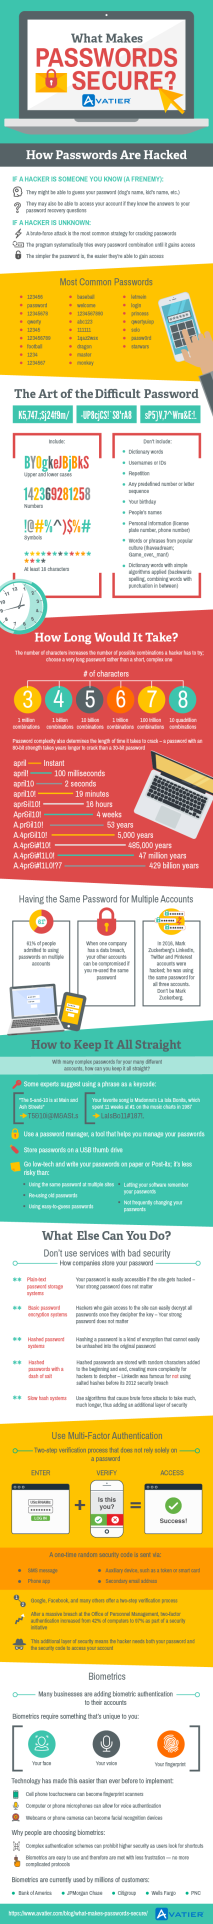 What Makes Passwords Secure?